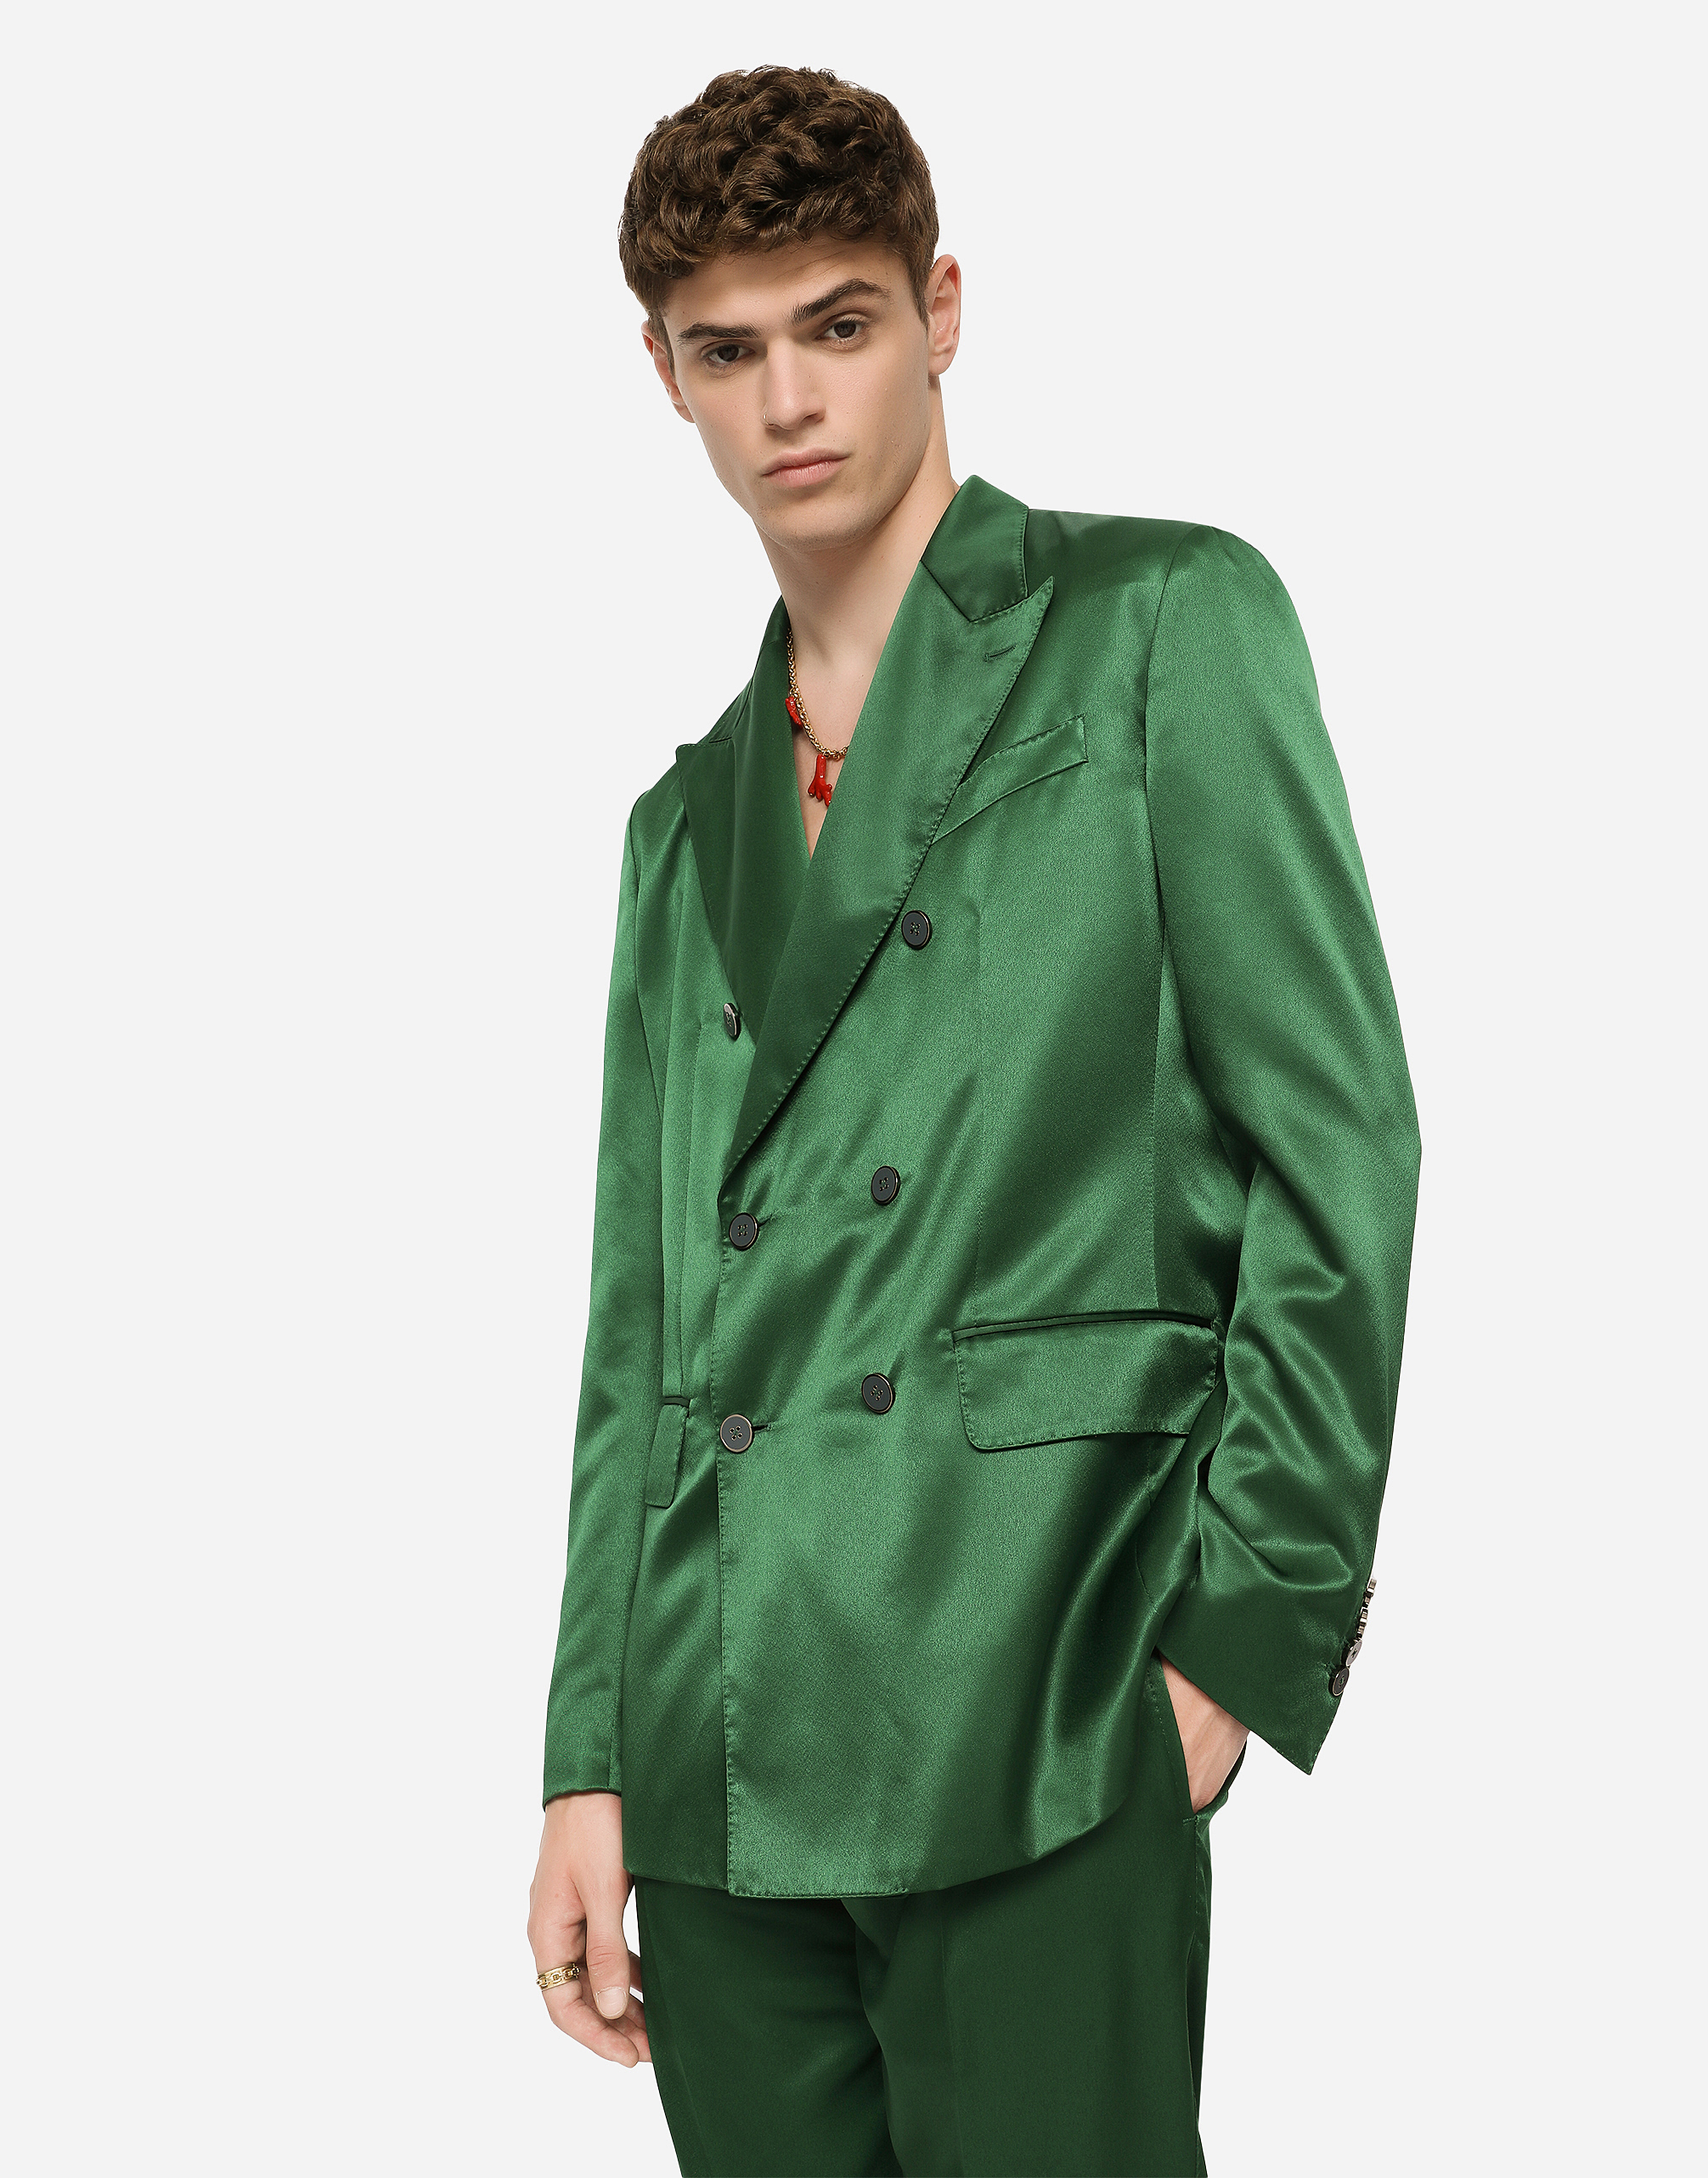 Deconstructed double-breasted satin jacket in Green